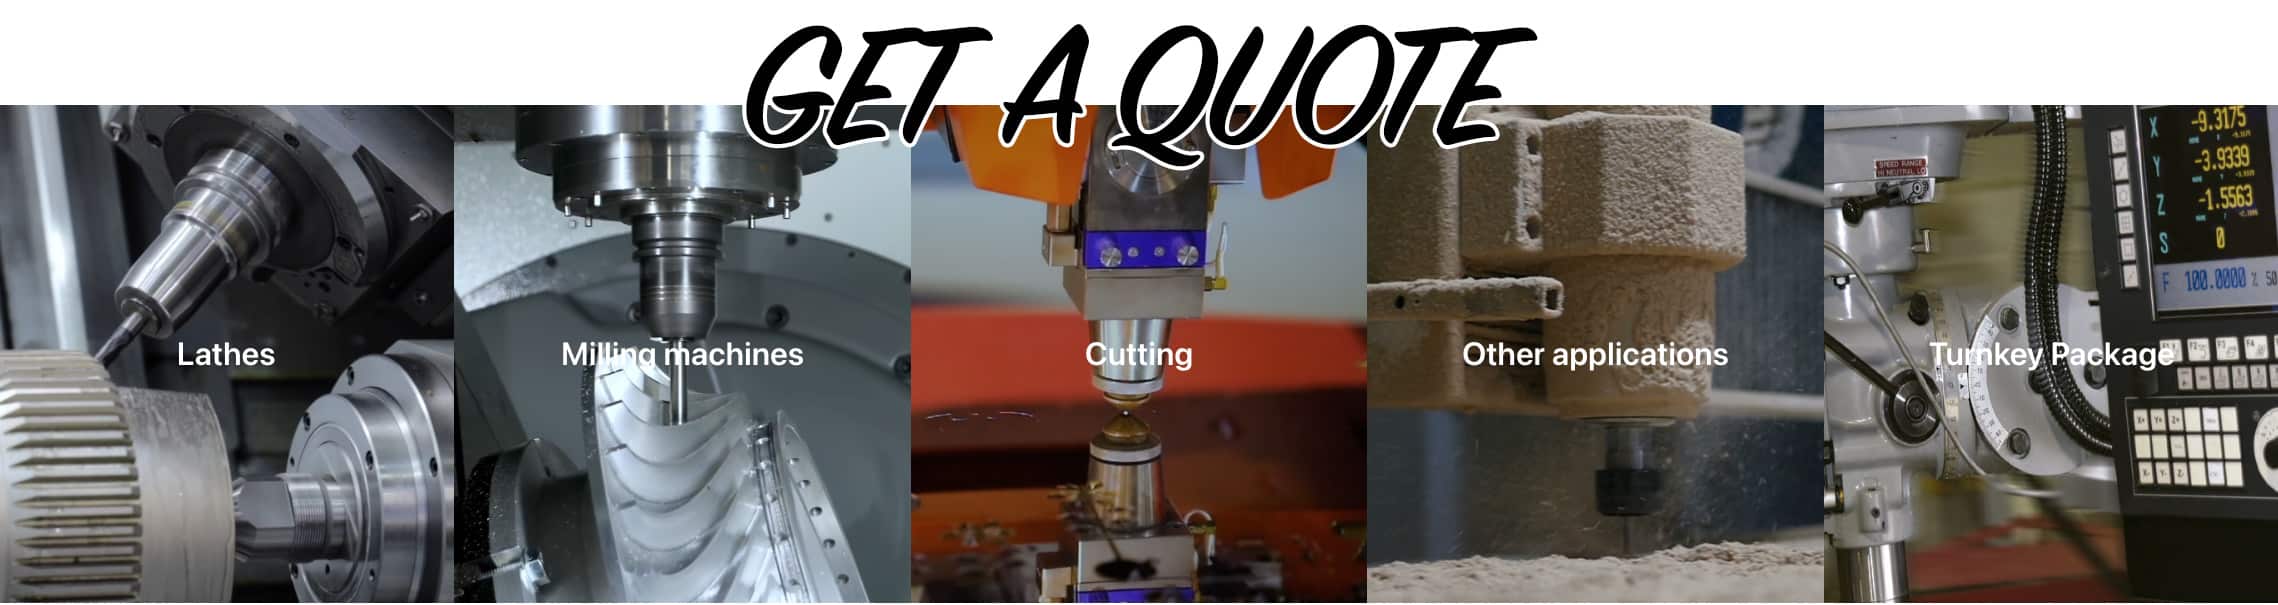 Get a Quote. Pictures of Lathes, milling machines, cutting and other applications